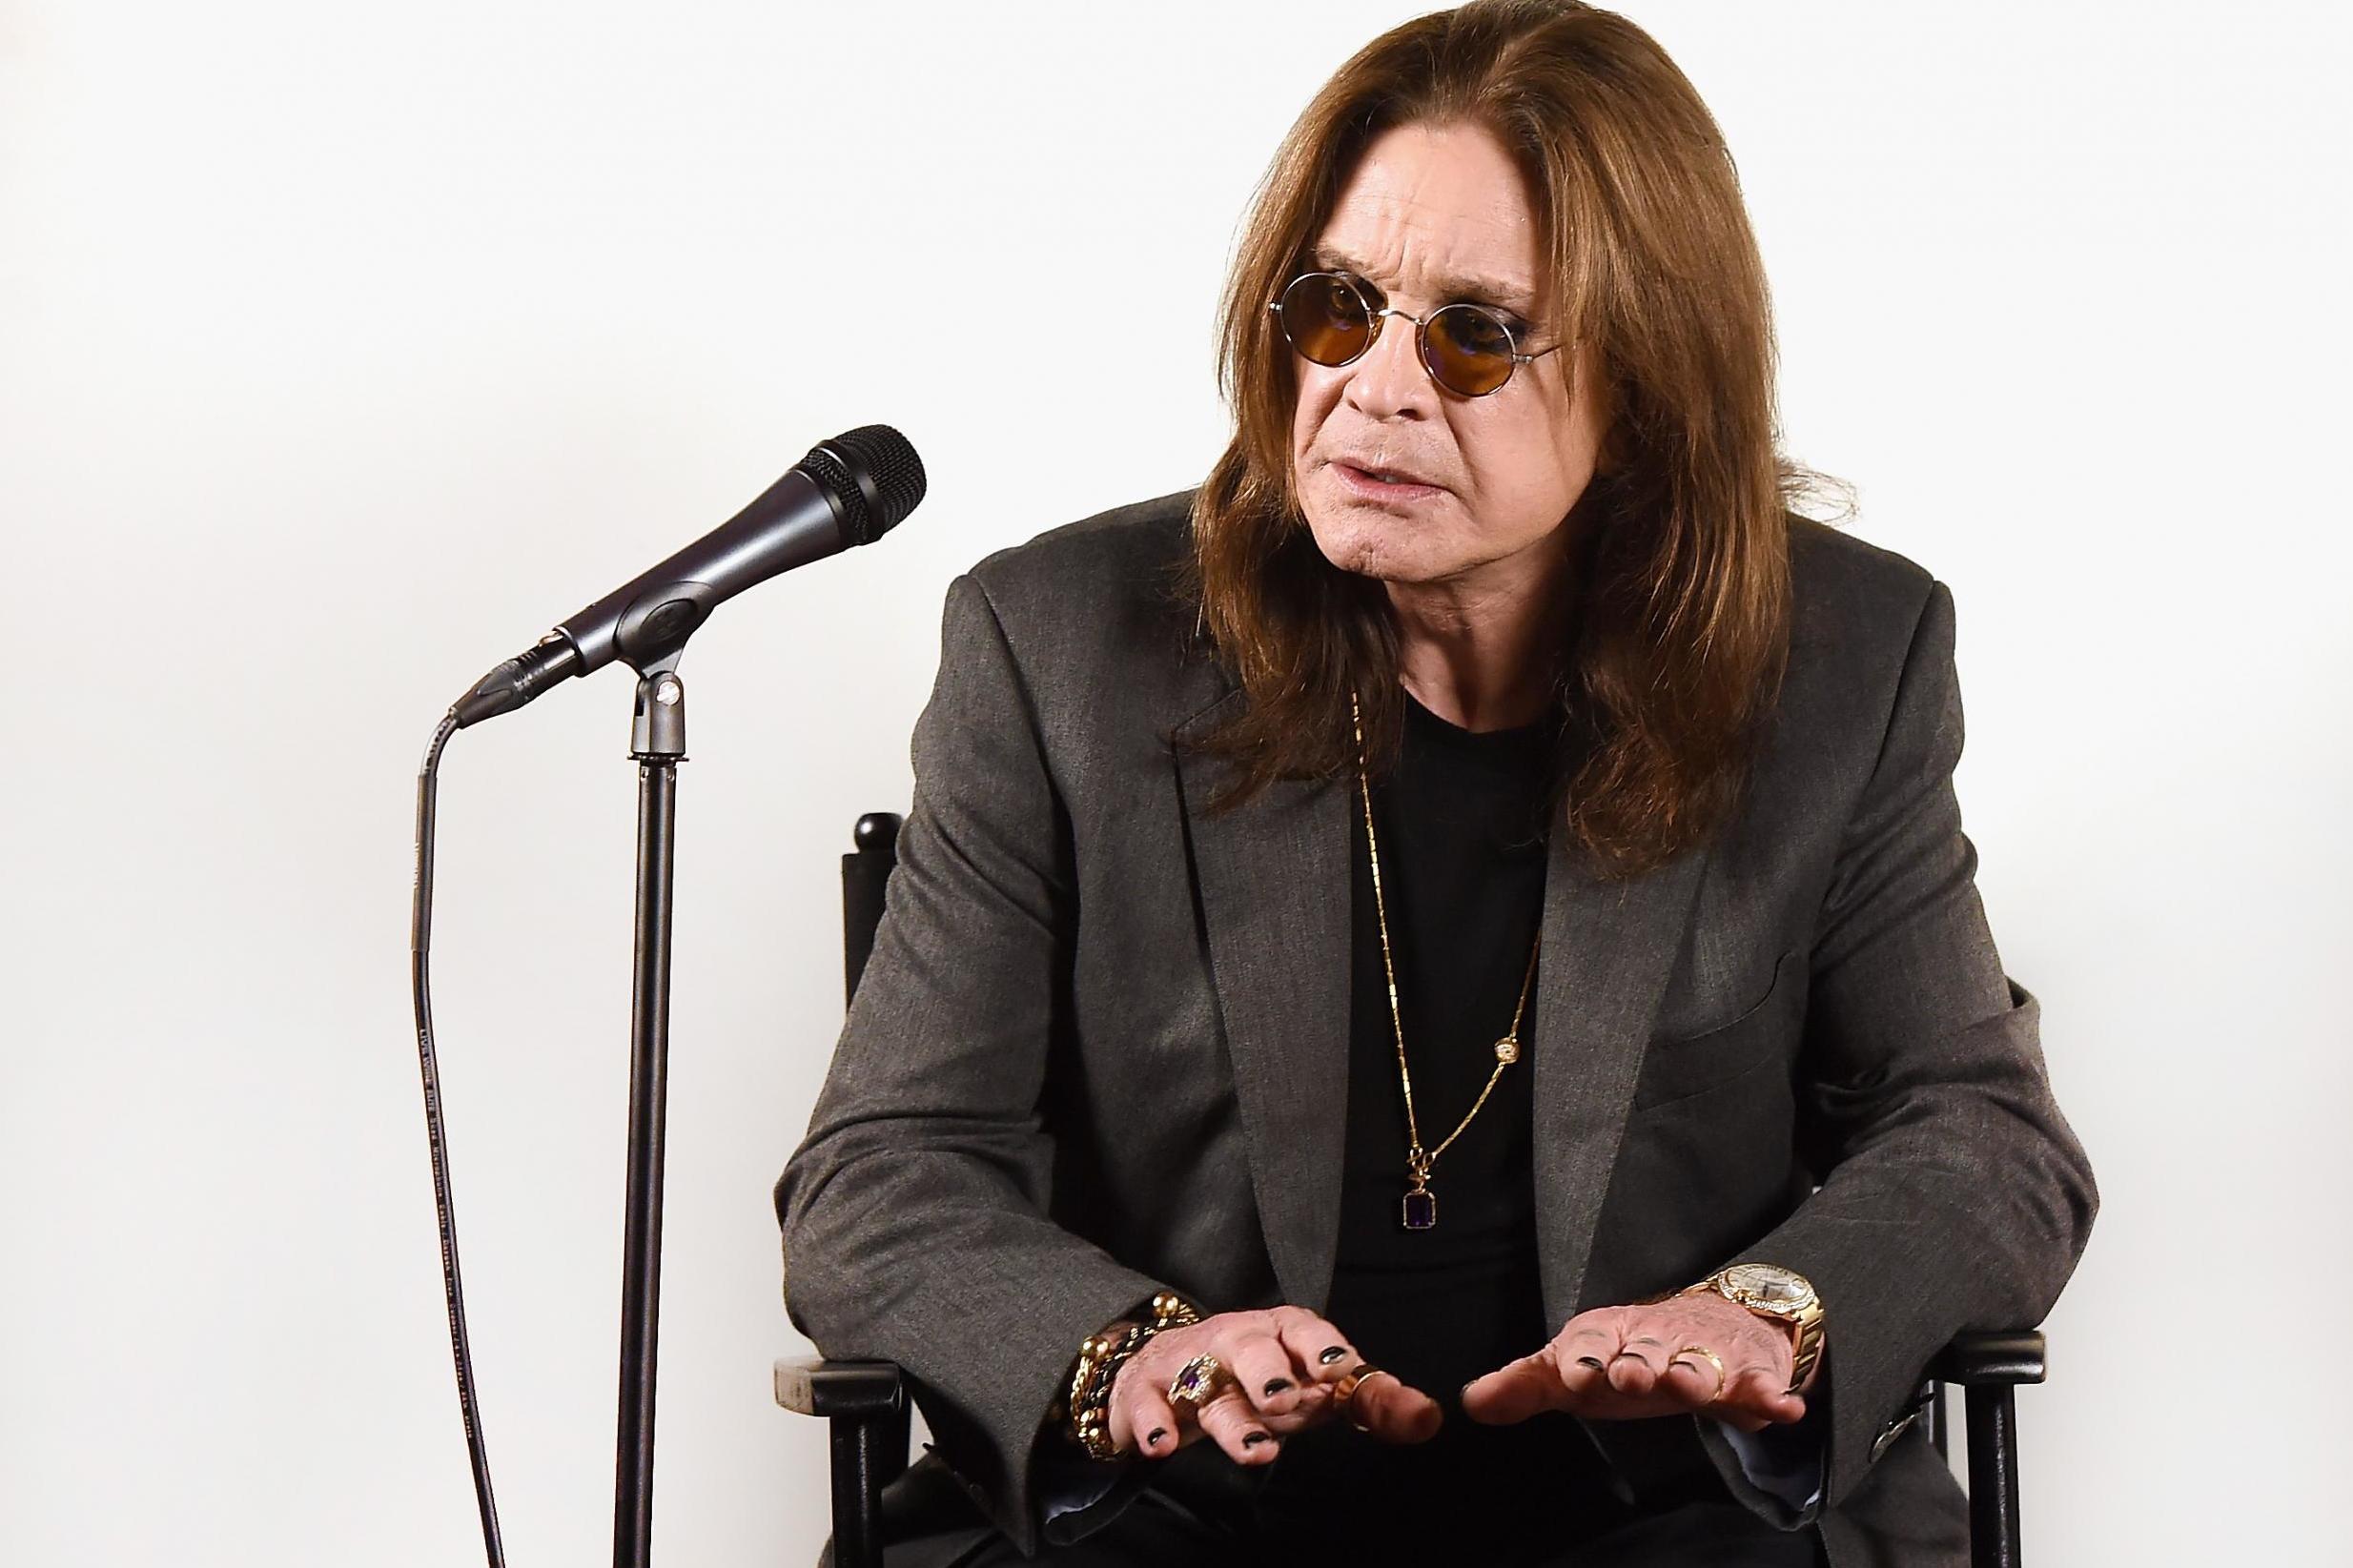 Ozzy Osbourne postpones all 2019 tour dates after suffering fall | The Independent2468 x 1645